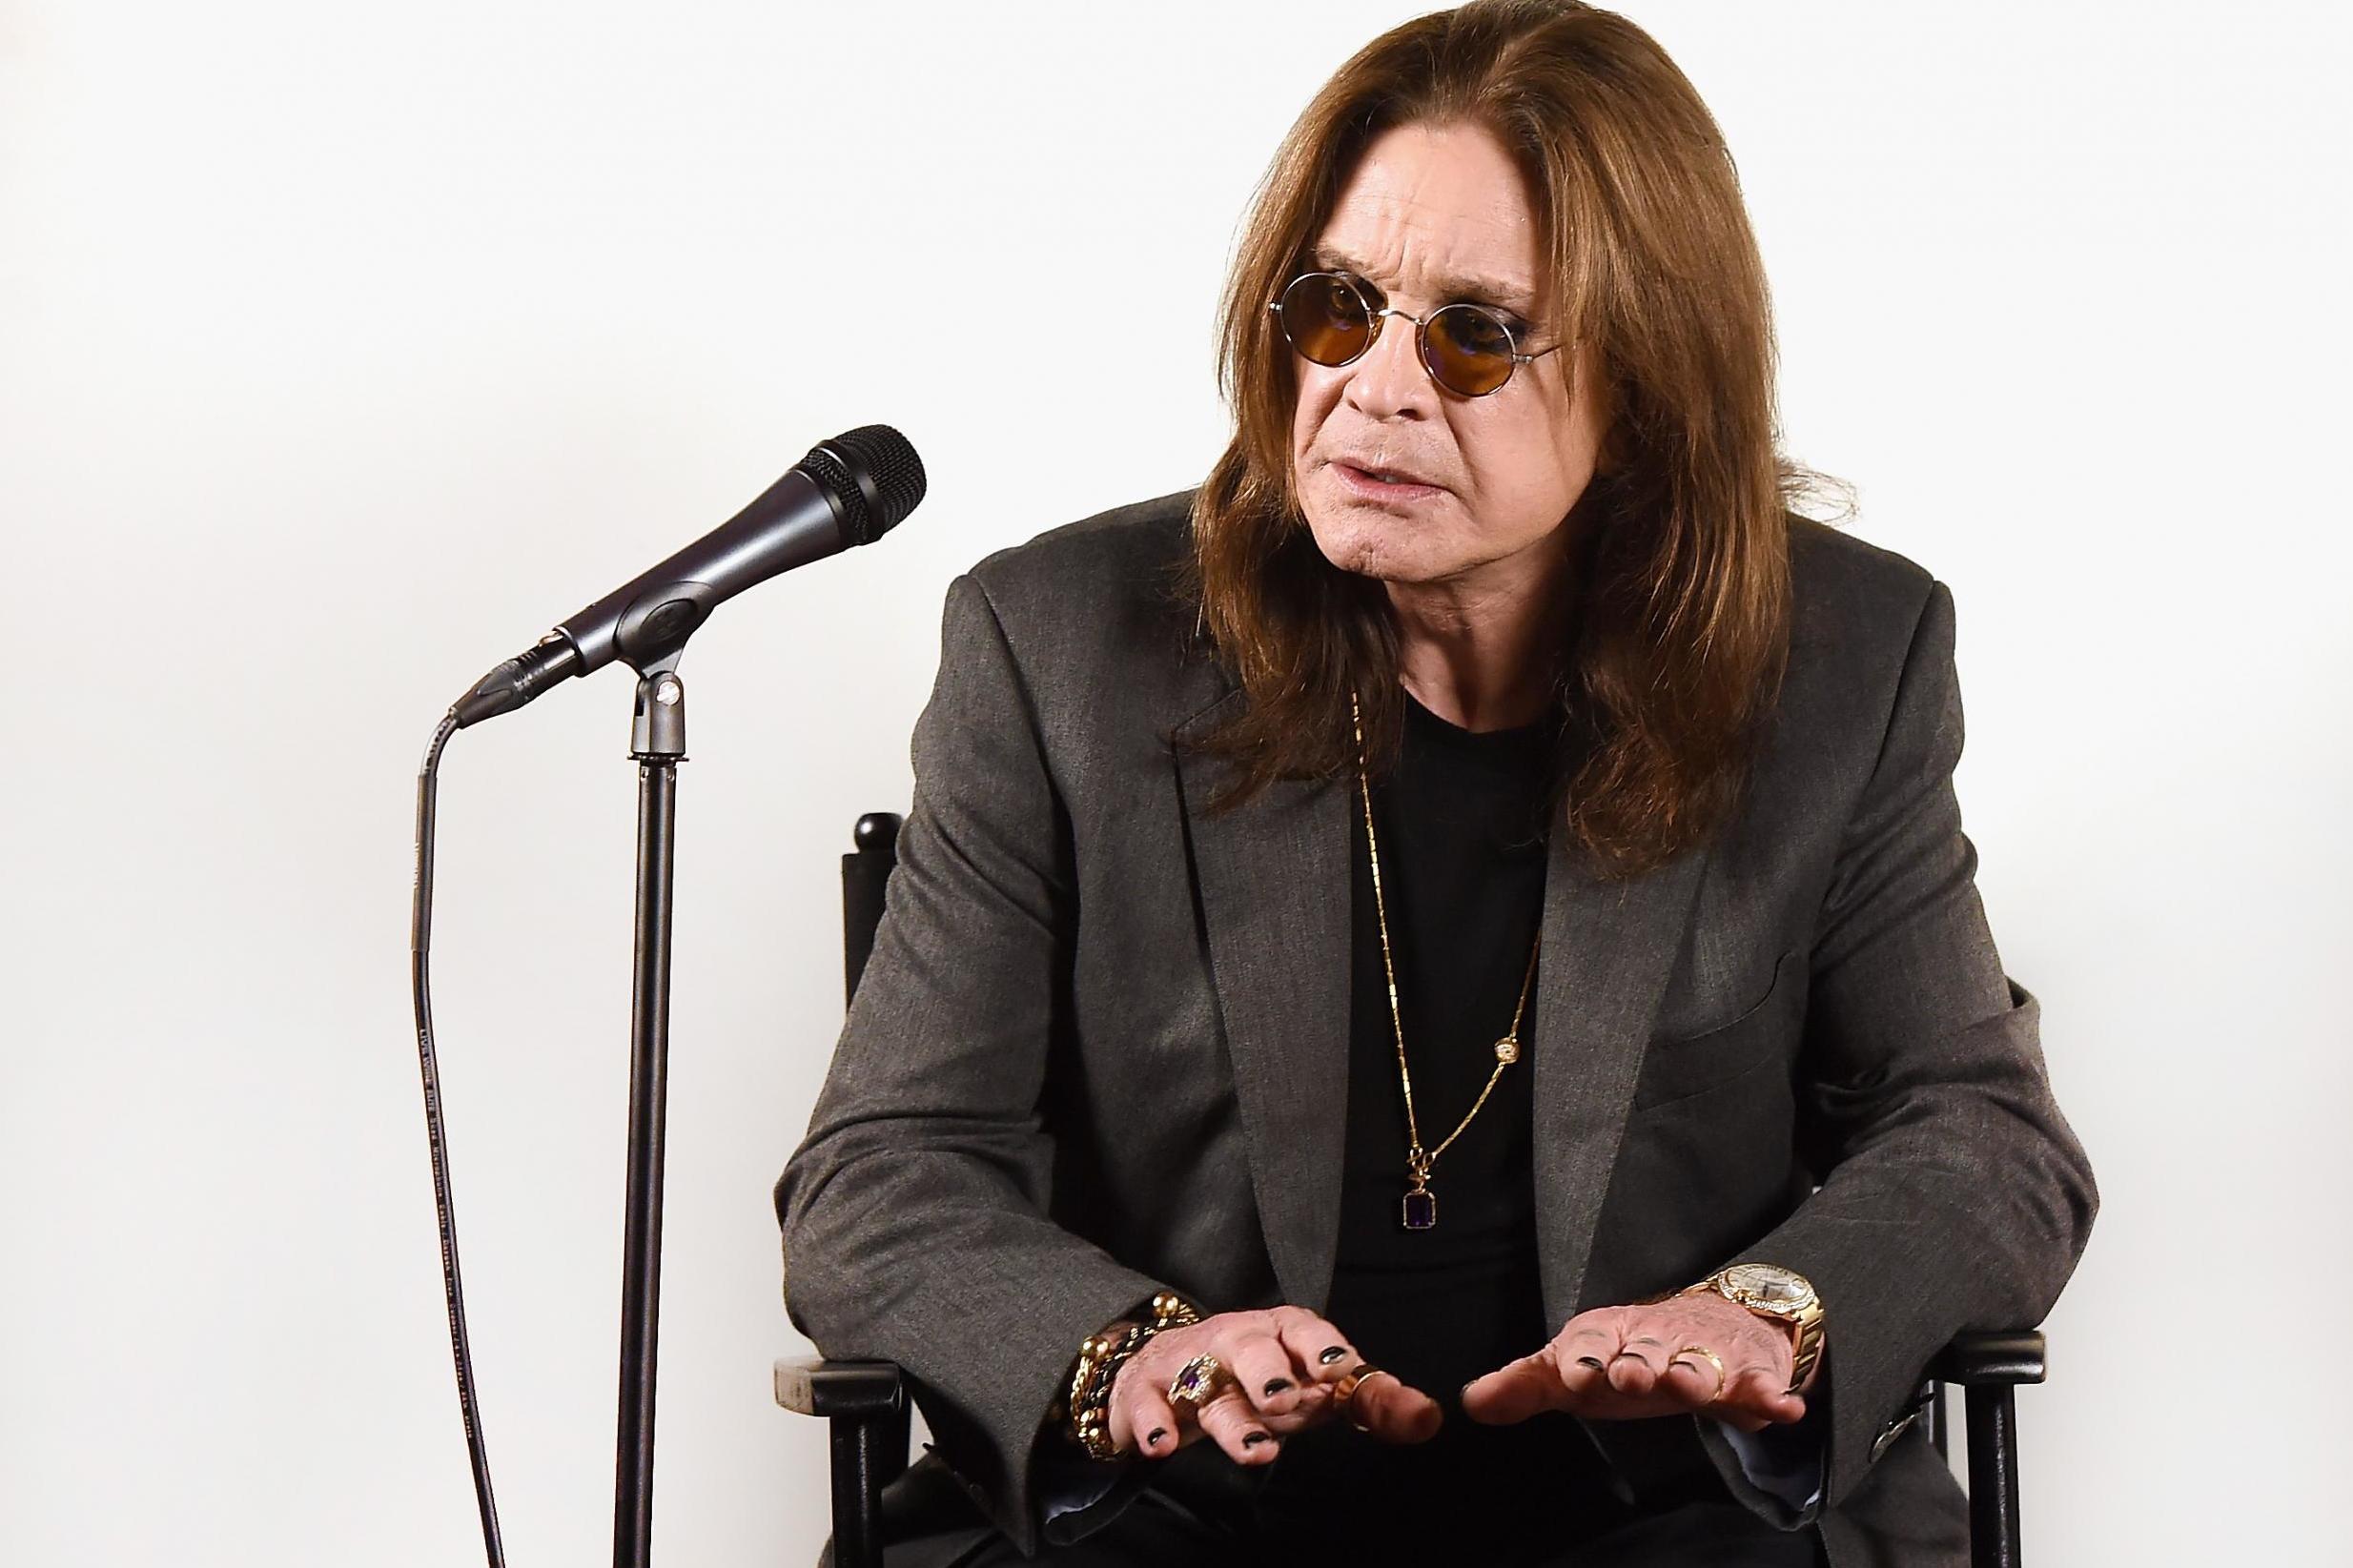 Ozzy Osbourne postpones all 2019 tour dates after suffering fall | The Independent2468 x 1645